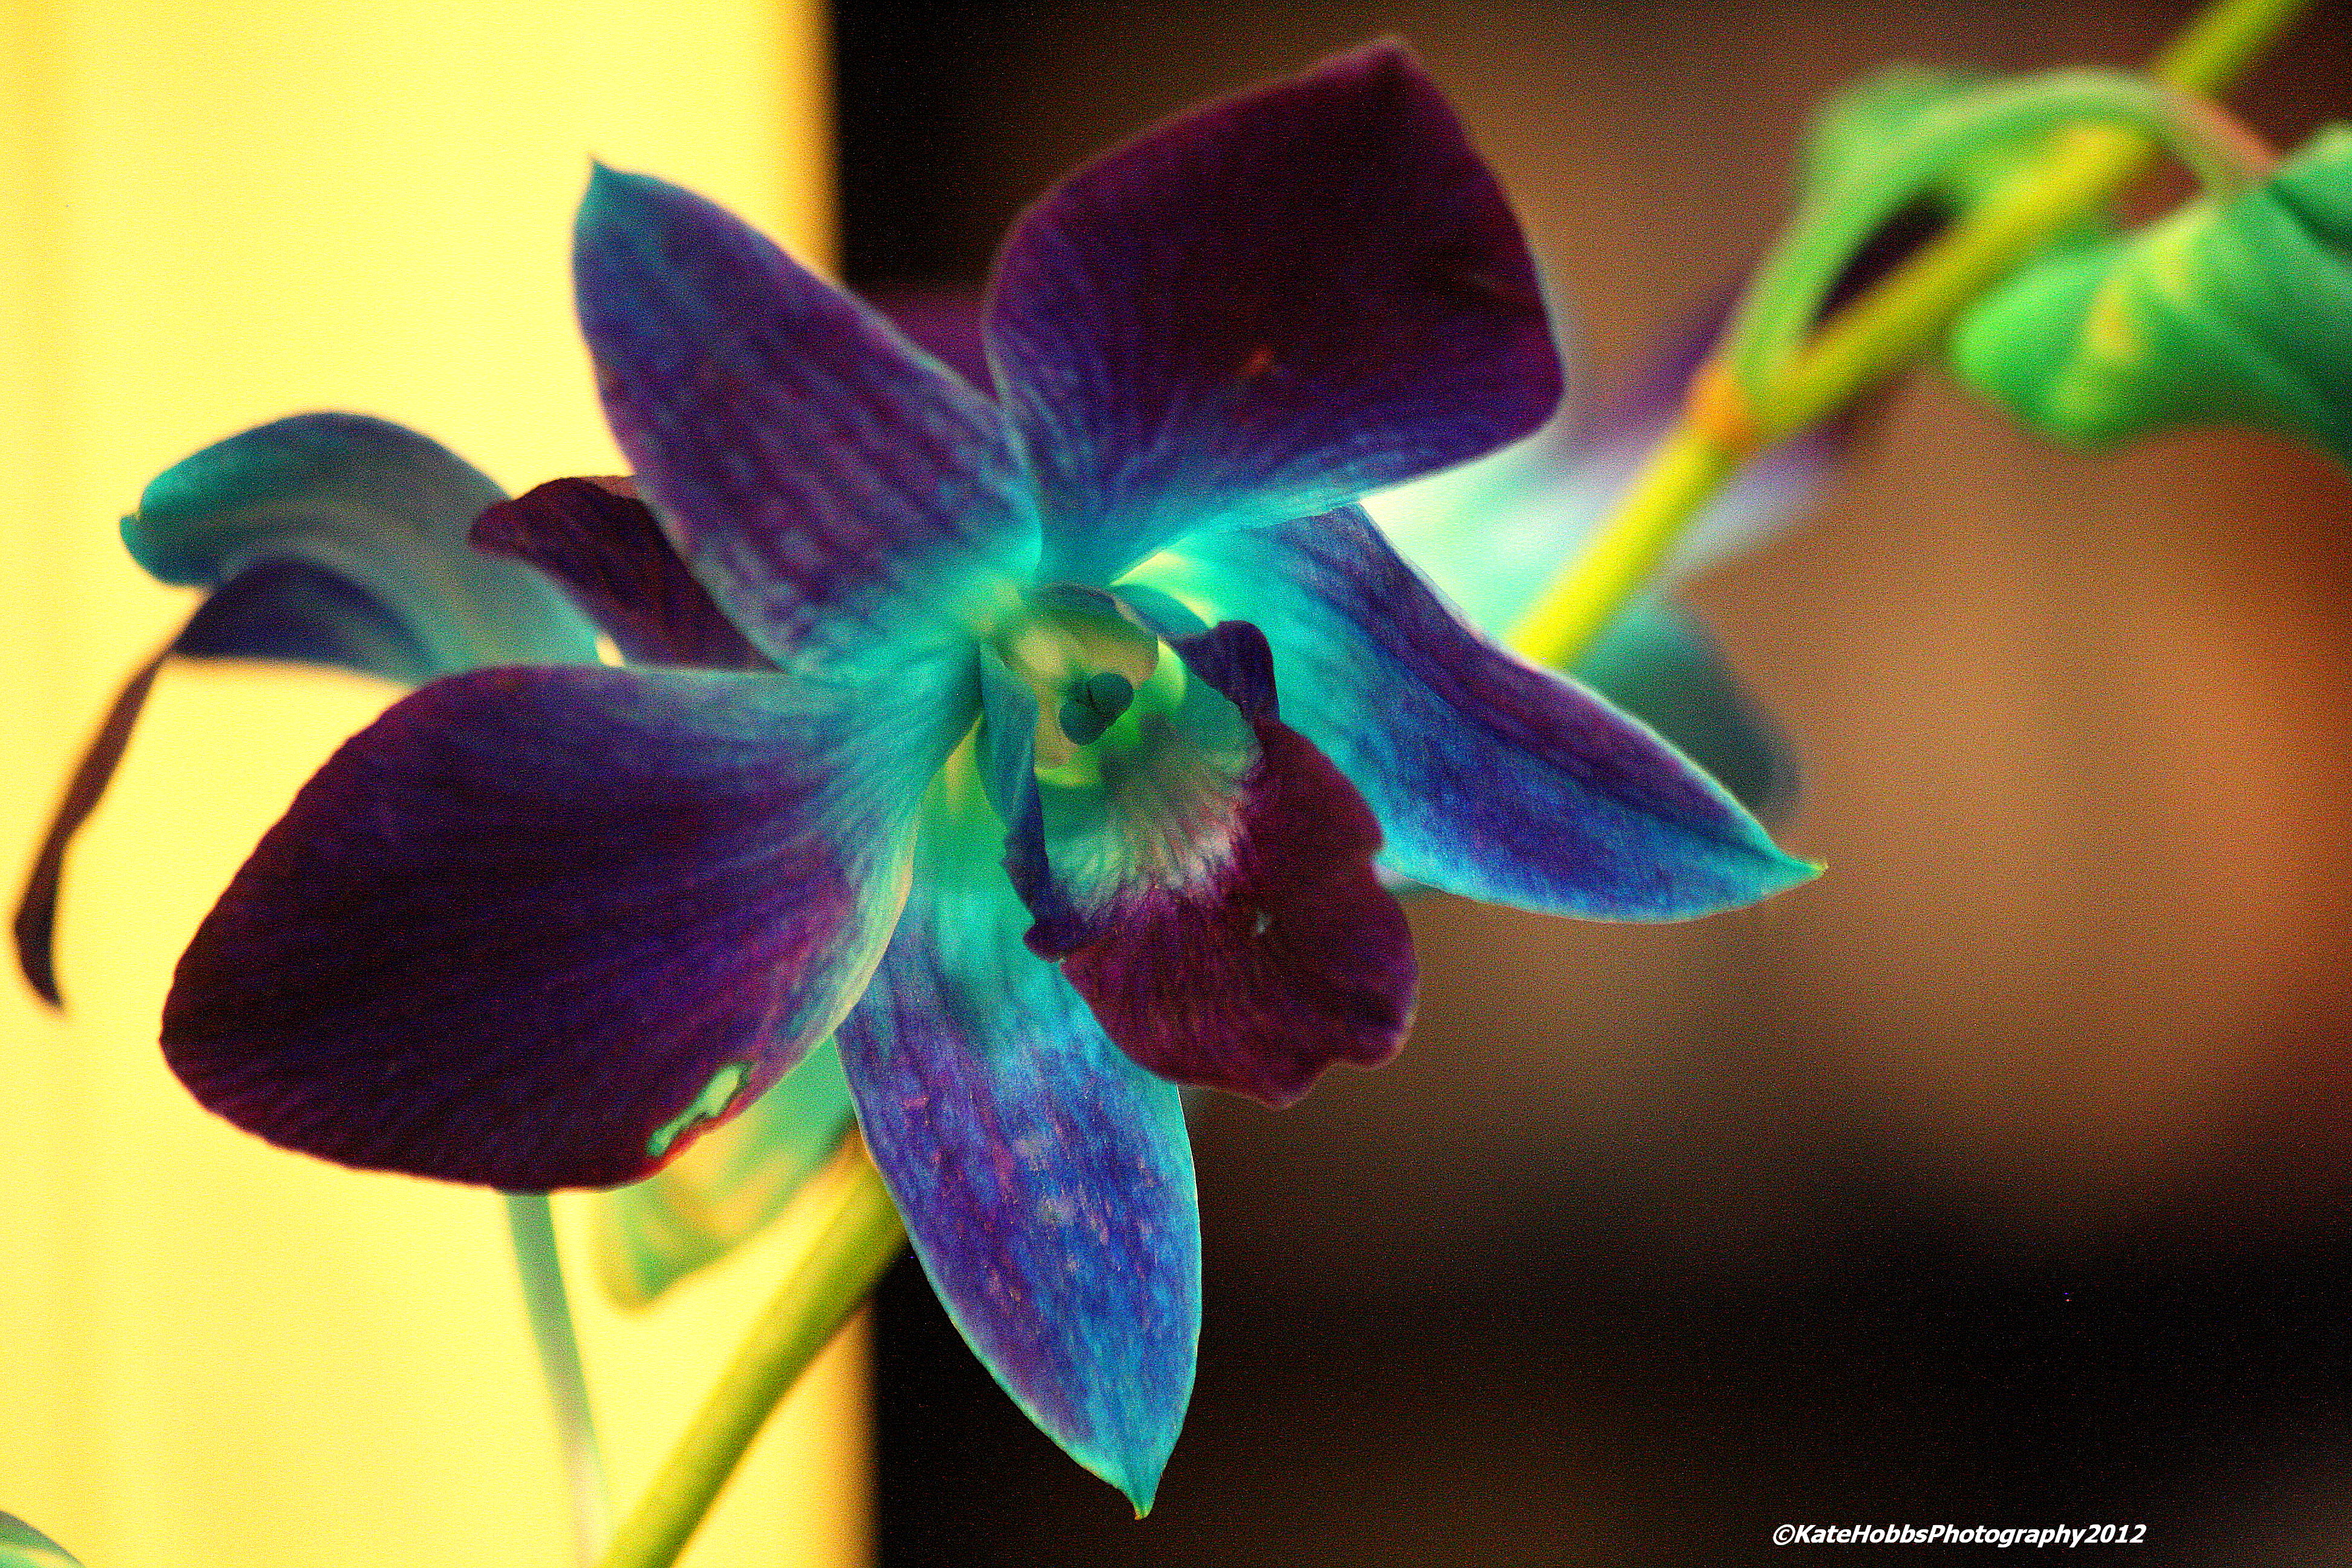 Real Blue Orchid Flower